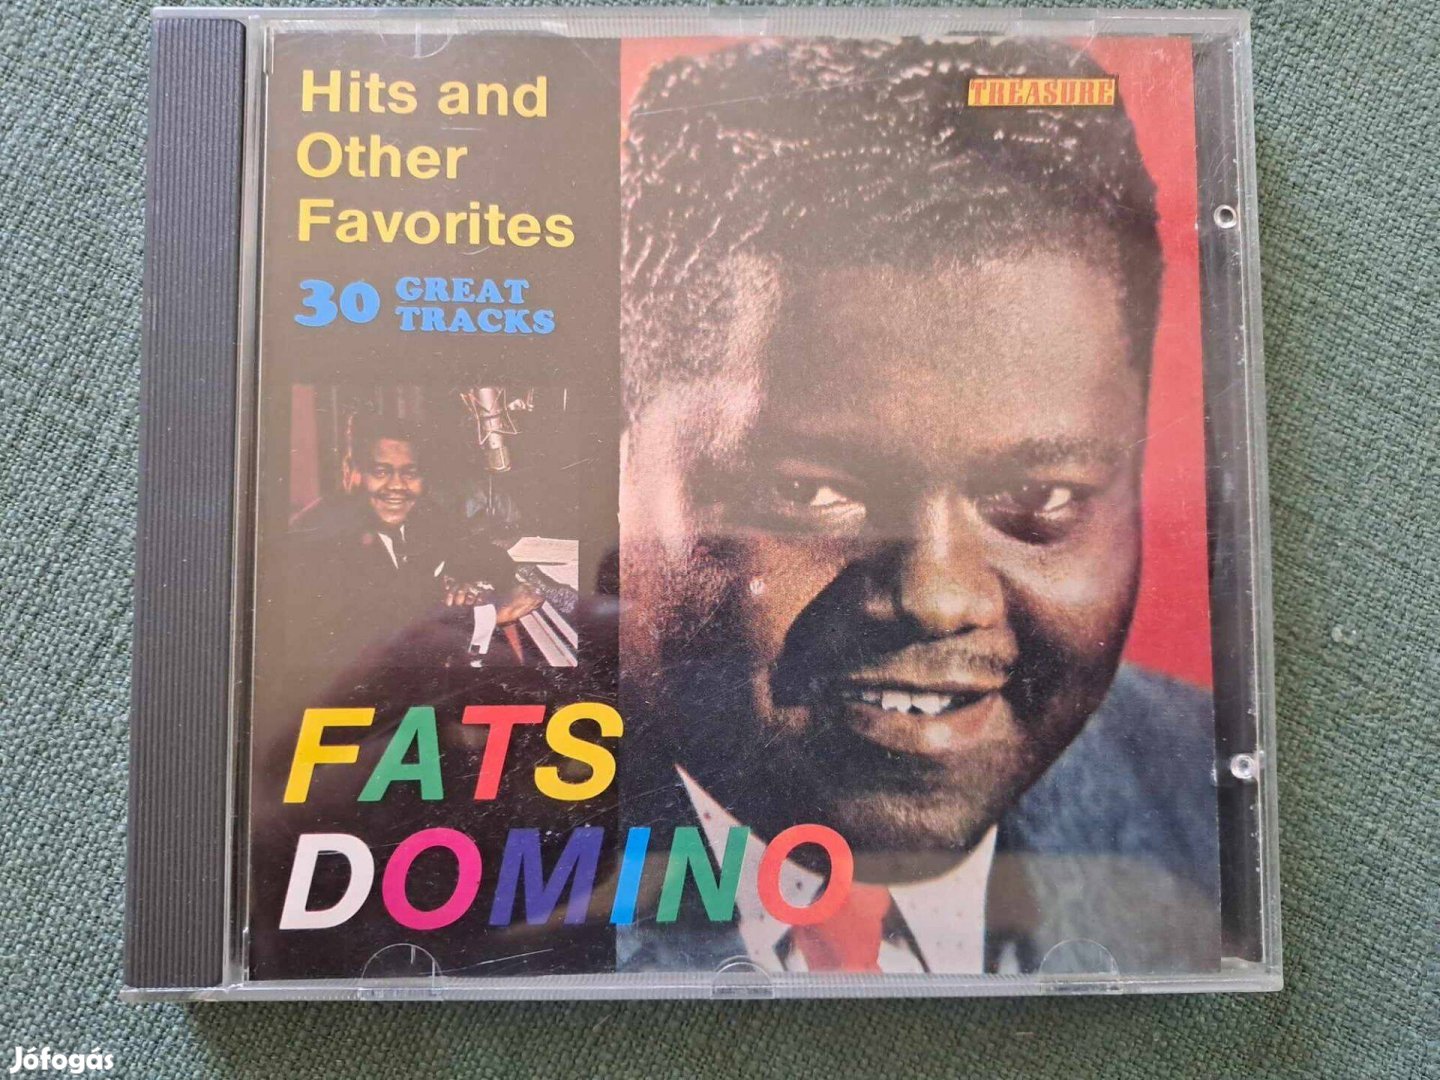 Fats Domino - Hits and Other Favorites CD